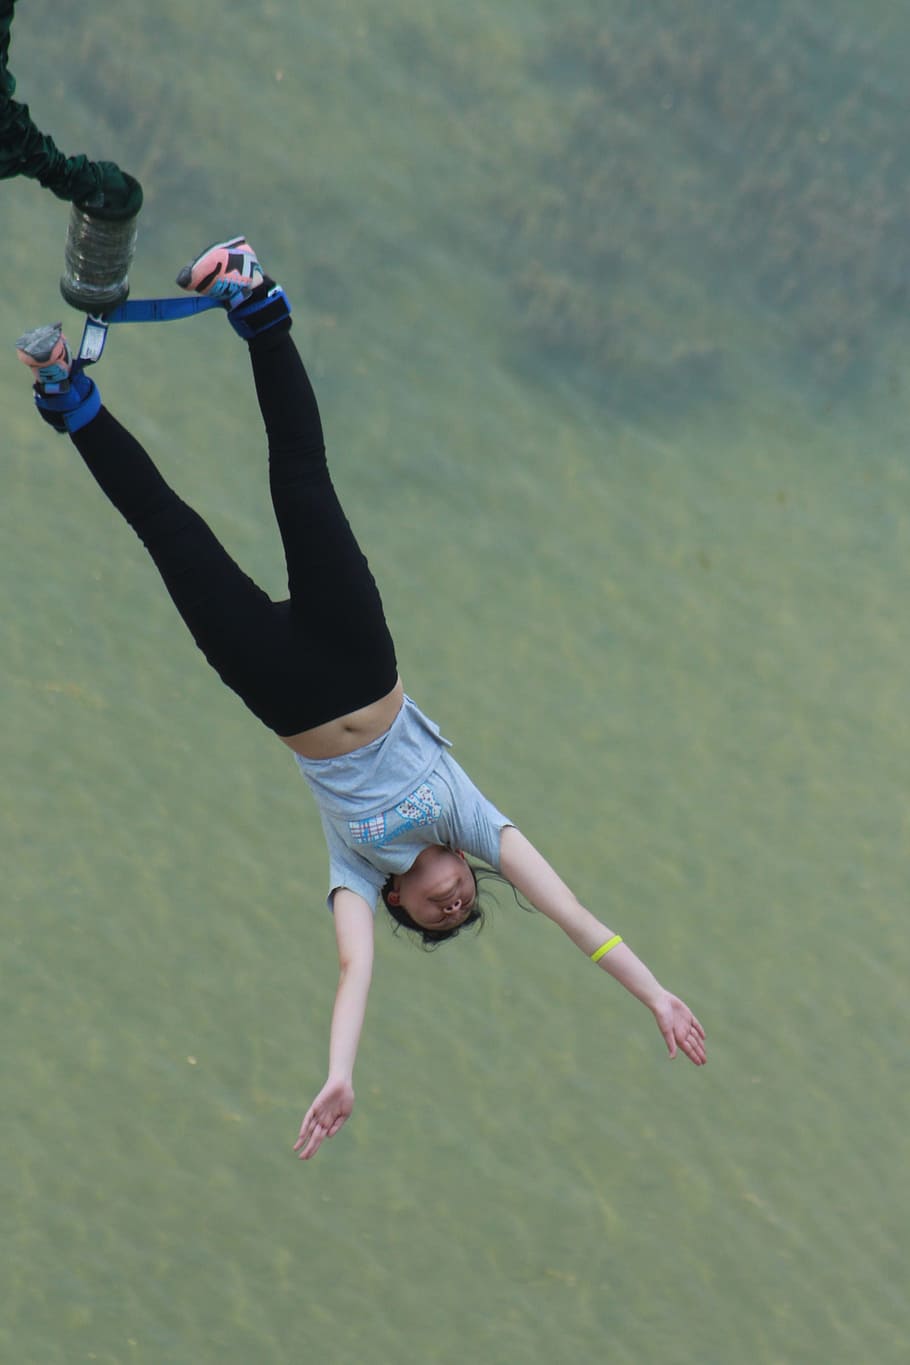 bungee jumping, brave, one person, lifestyles, leisure activity, HD wallpaper